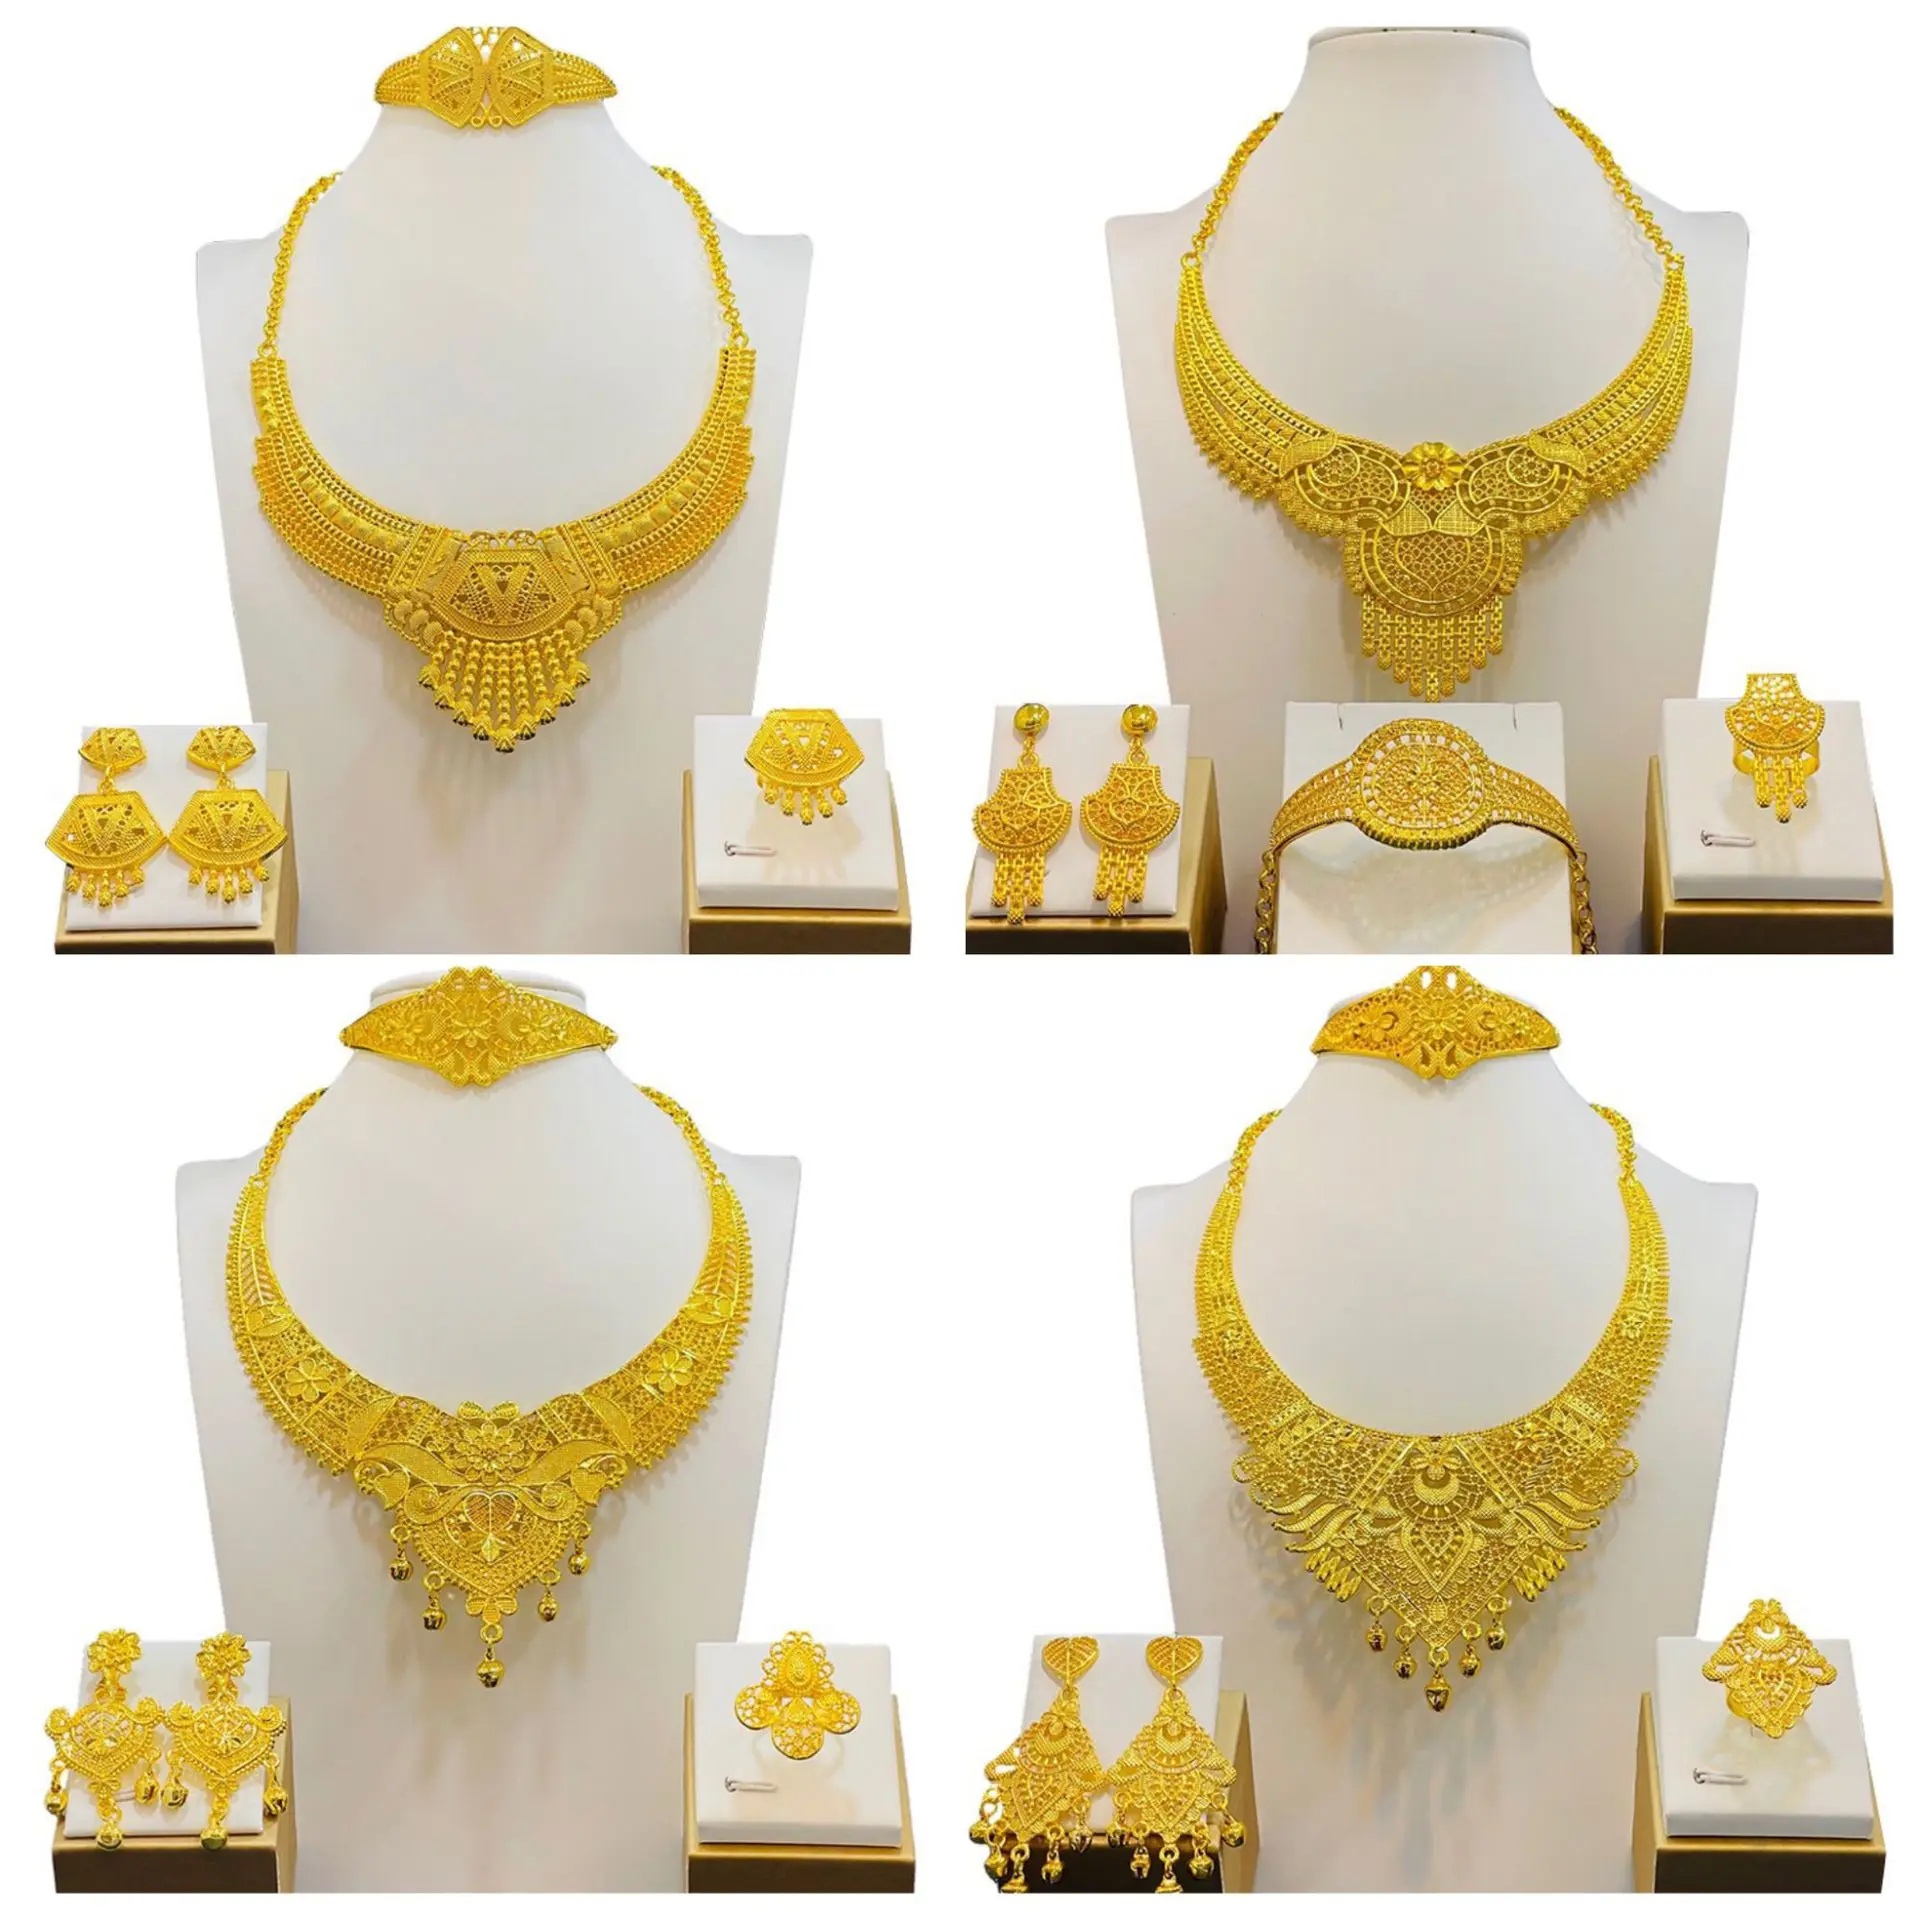 

New 24K Gold Bride Wedding Jewelry Set For Woman Vietnam India Africa Thailand Dubai Banquet Necklace Earring Ring Bracelet